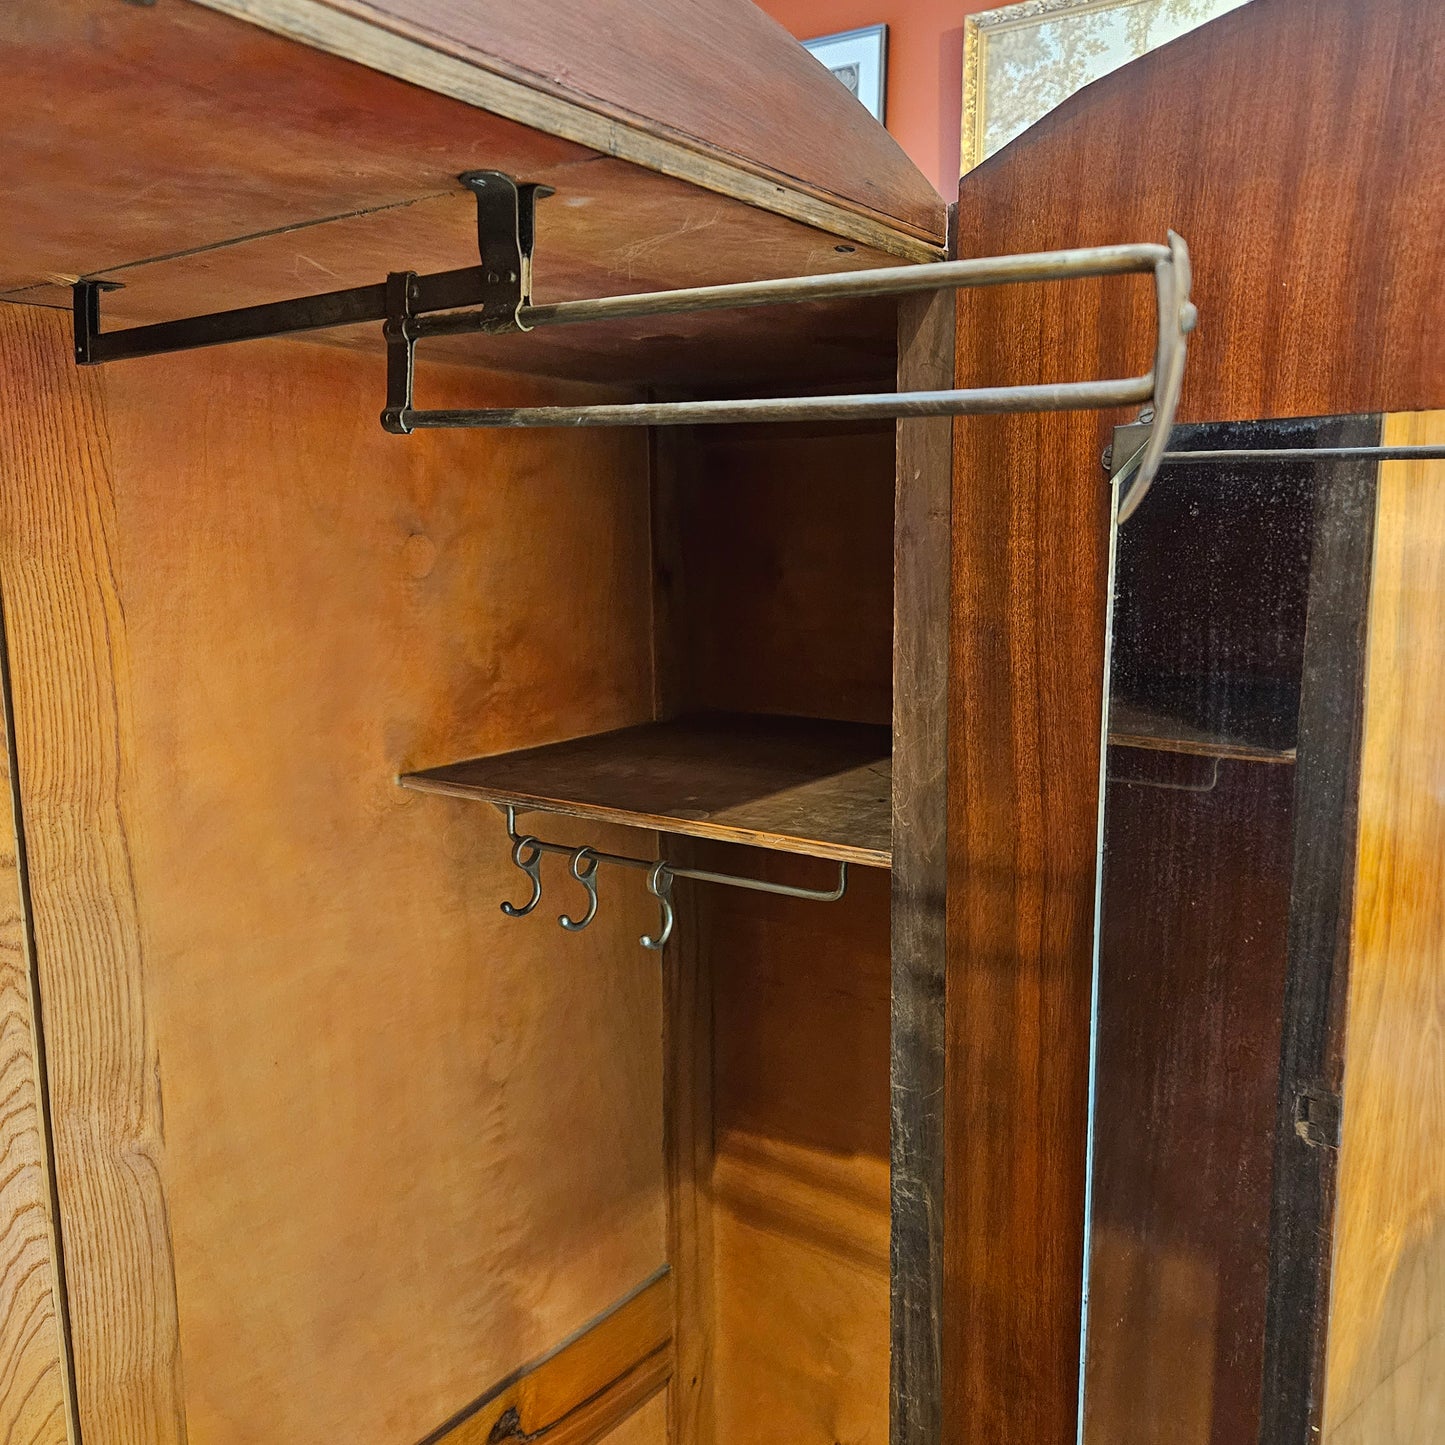 Vintage wardrobe with pullout rail